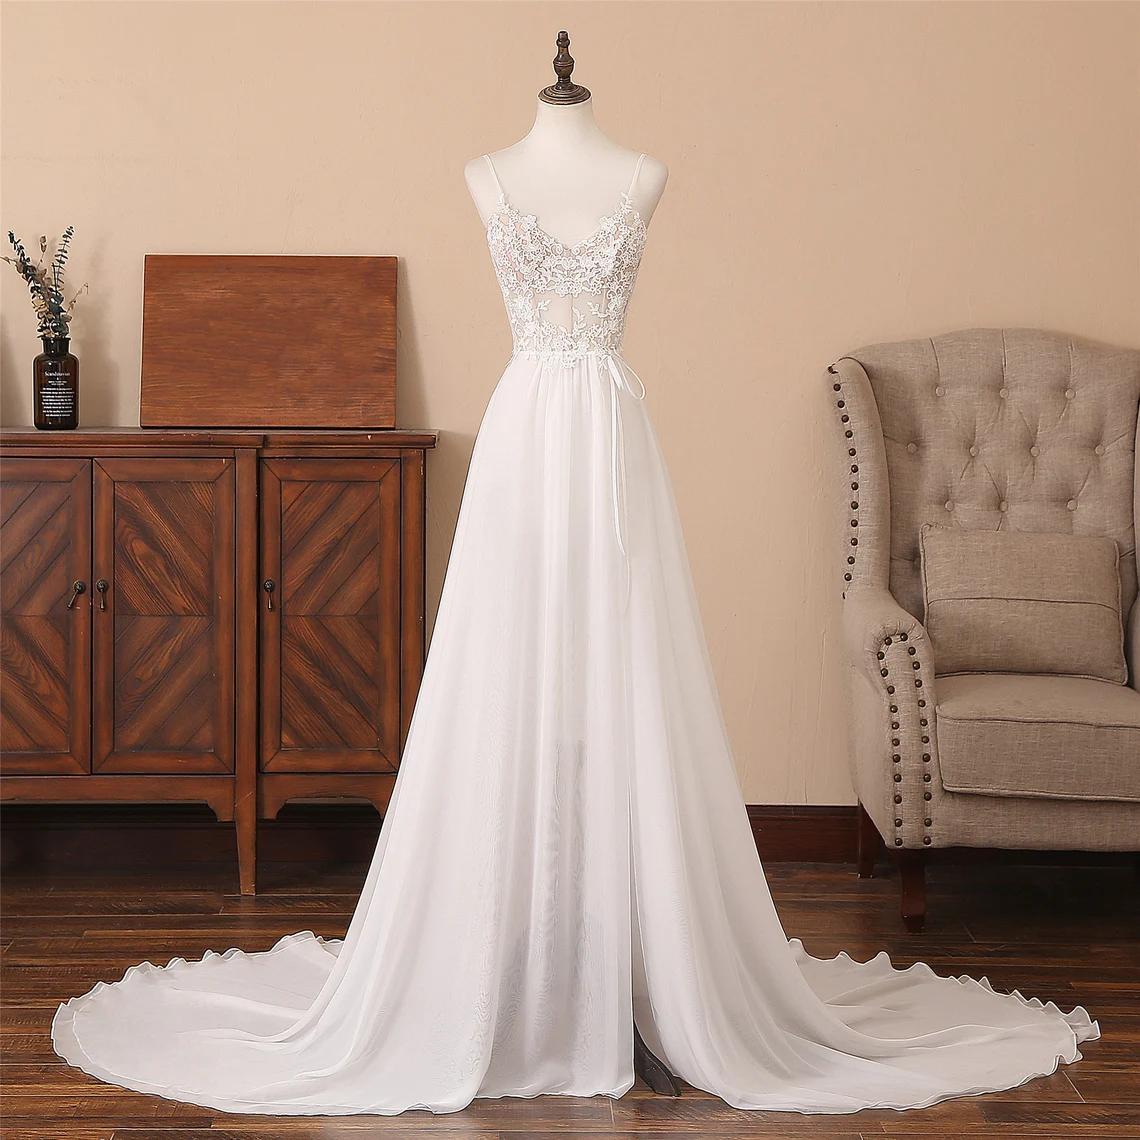 Ivory Chiffon And Lace Long Party Dress Prom Dress With Slit, A-line Long Formal Gown